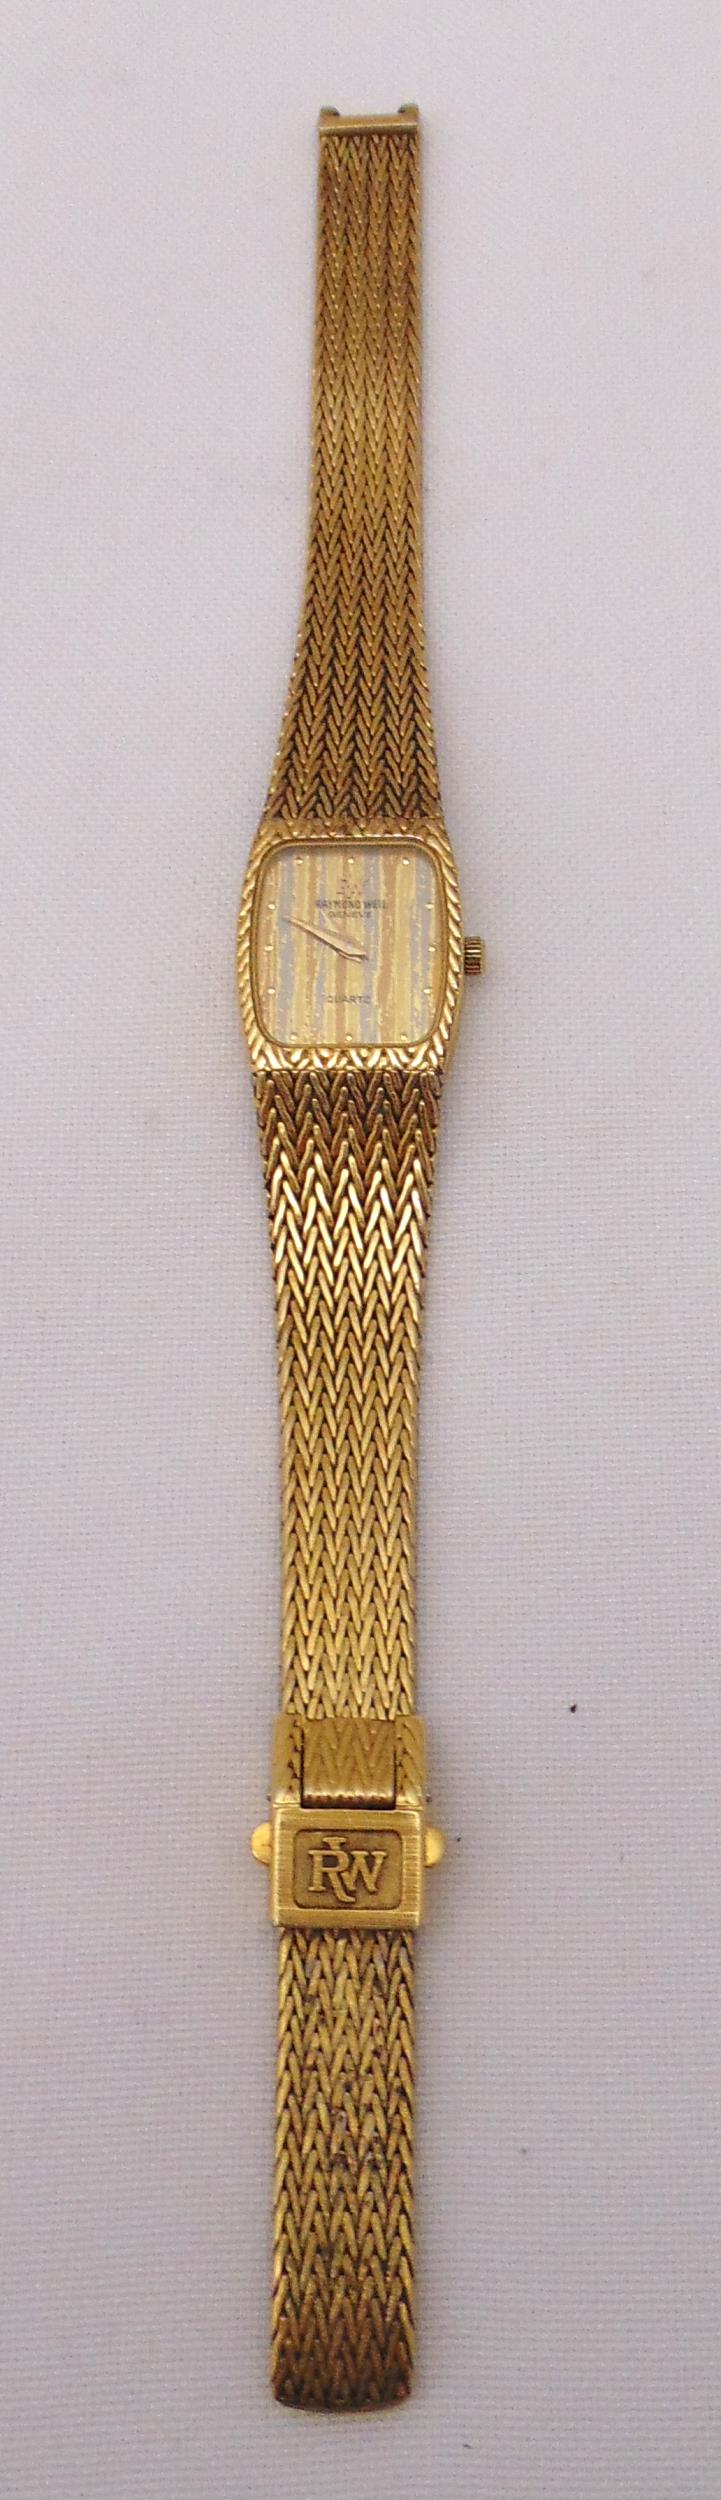 Raymond Weil gold plated ladies wristwatch on a gold plated articulated bracelet